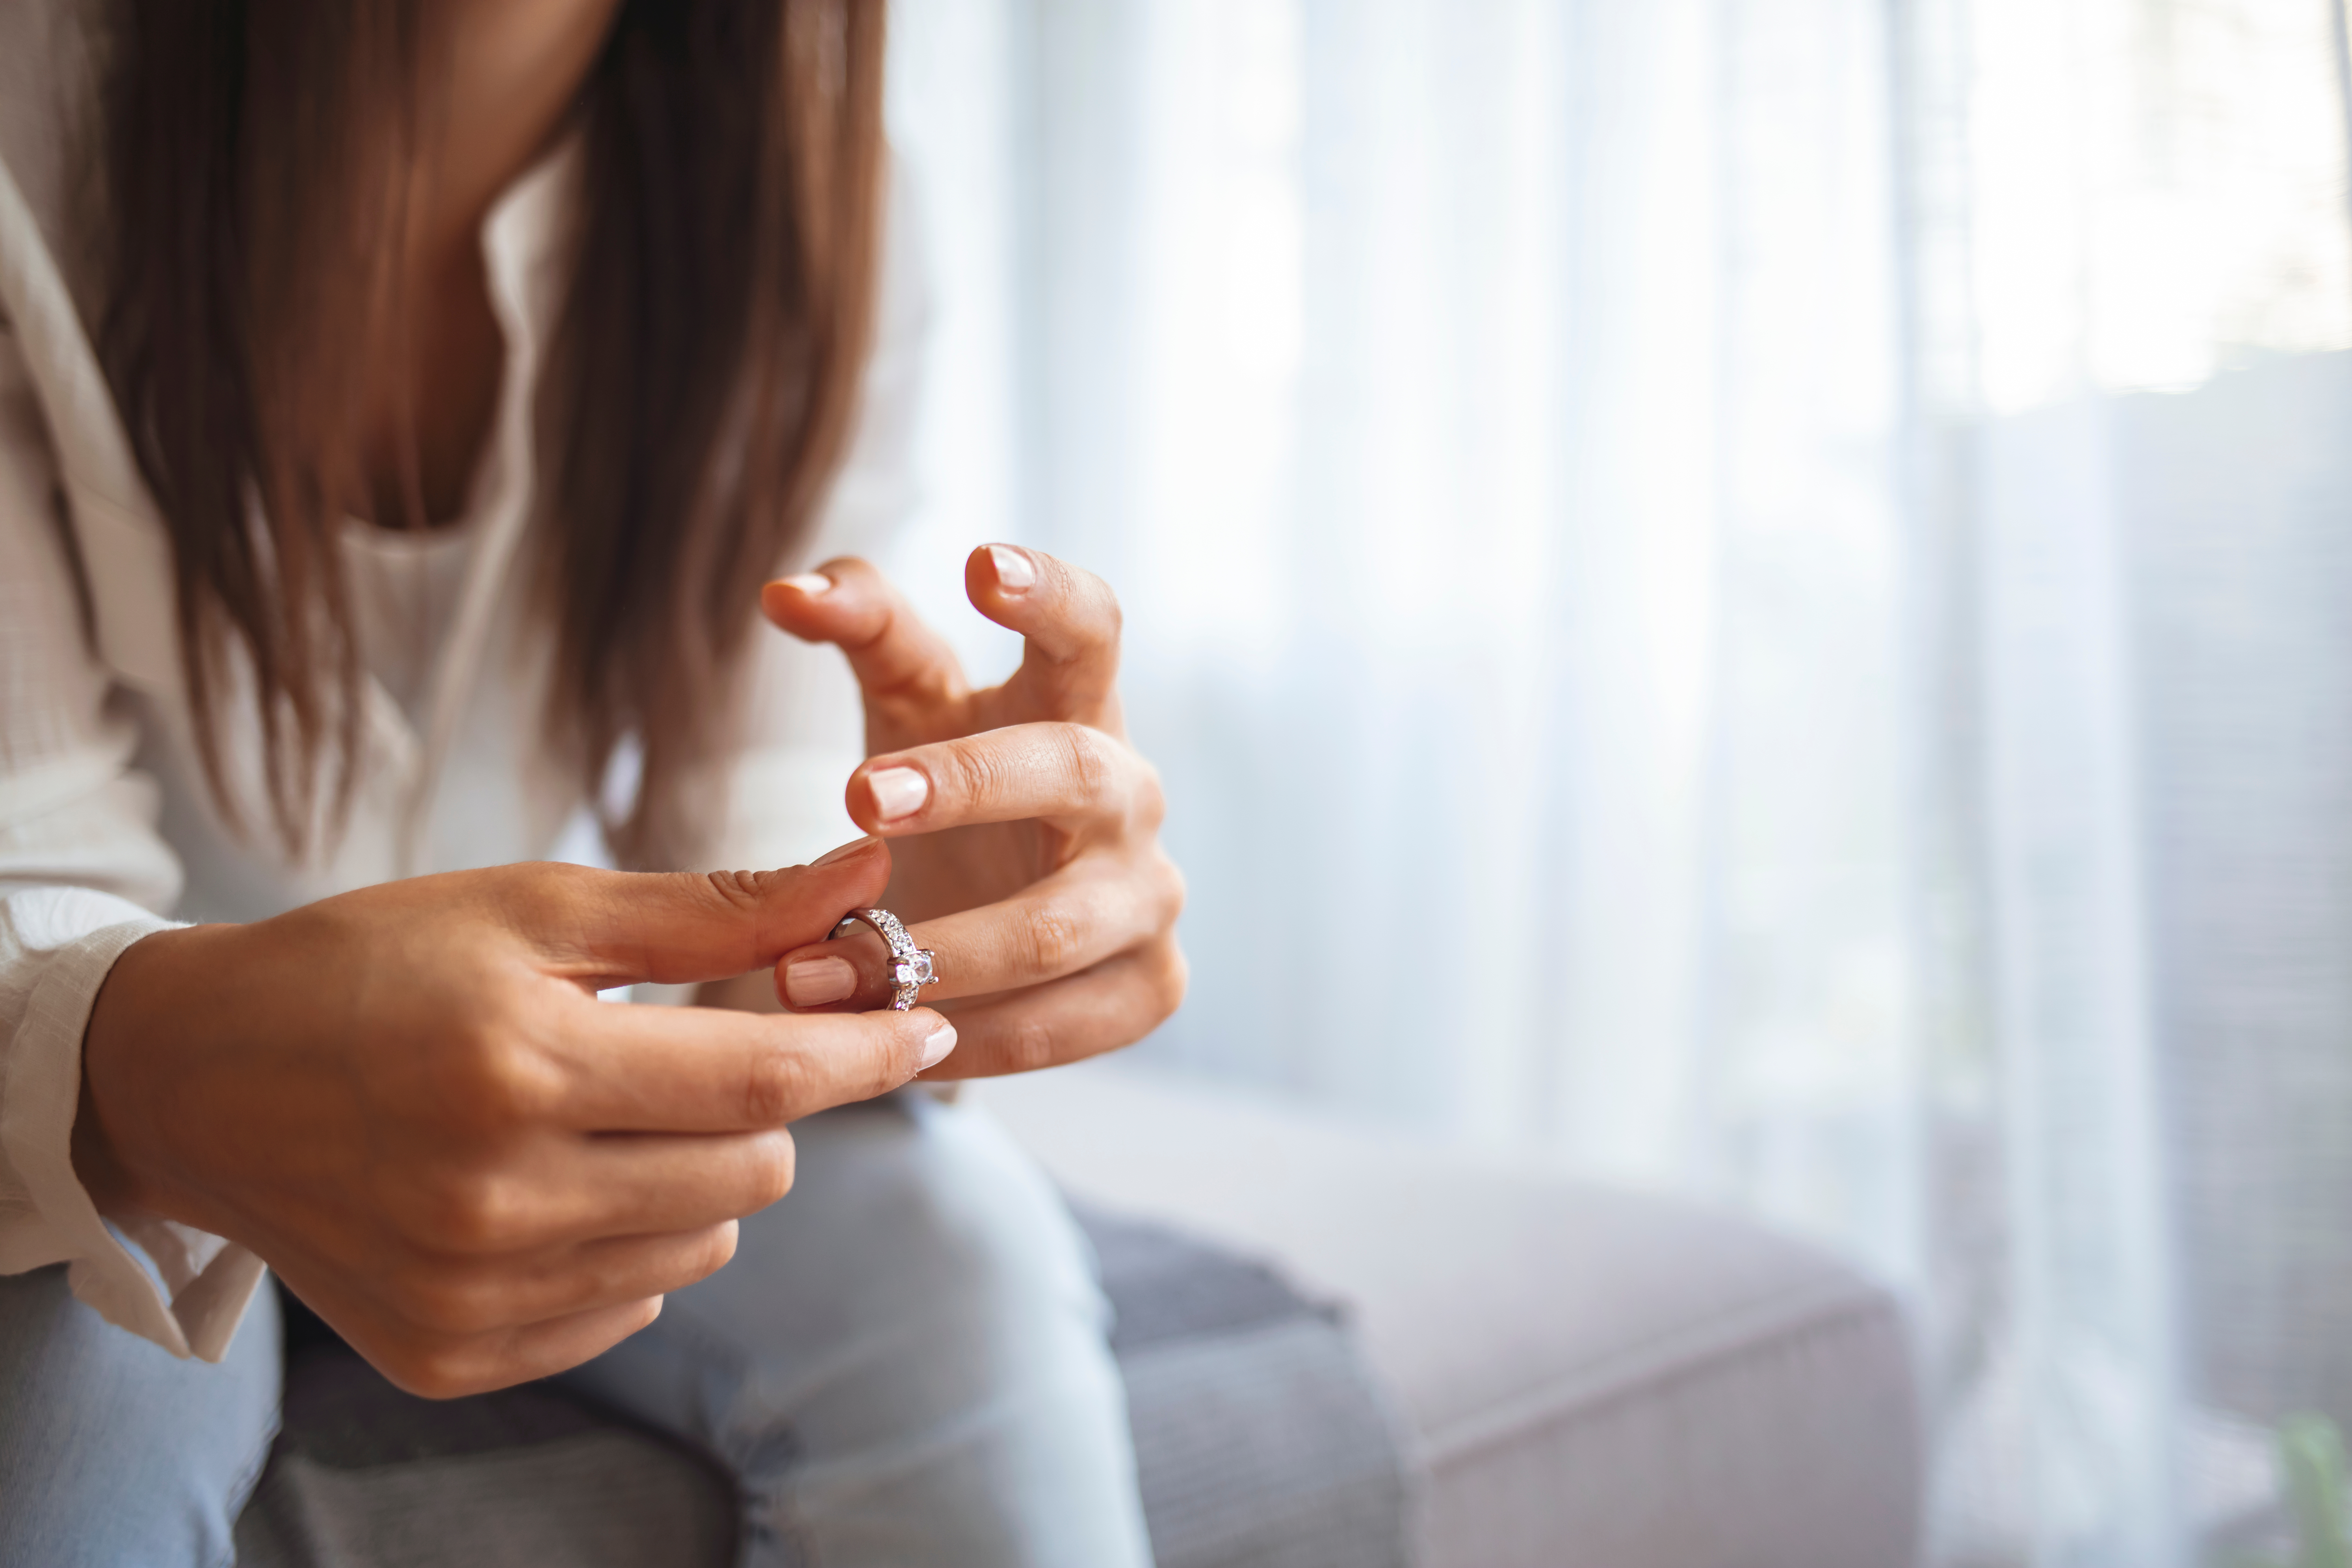 A distraught woman holding her wedding ring | Source: Shutterstock